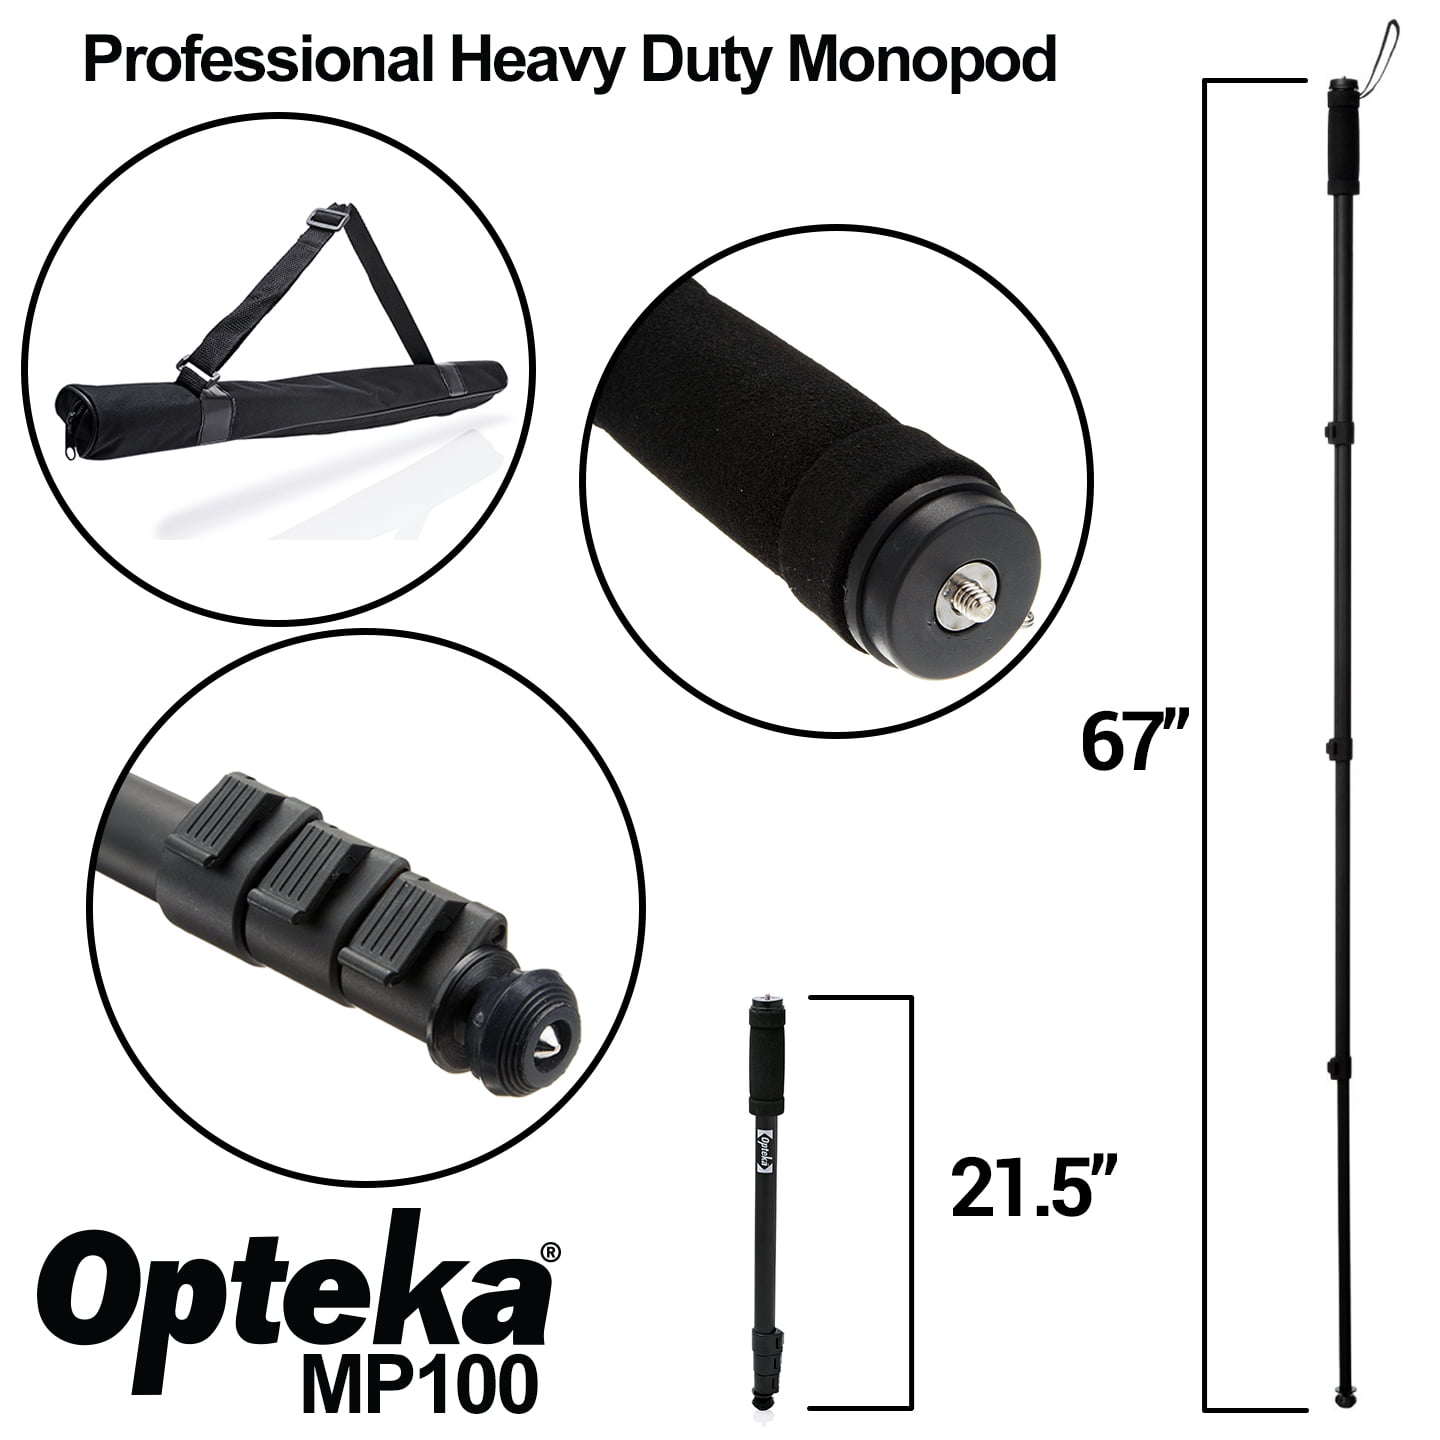 Opteka X-Grip Professional Action Stabilizing Handle with LED Video Light 3X GoPro Tripod Mounts and Microfiber Cleaning Cloth for DSLR Cameras Sports Action Cam and Camcorders 72 Monopod Black 